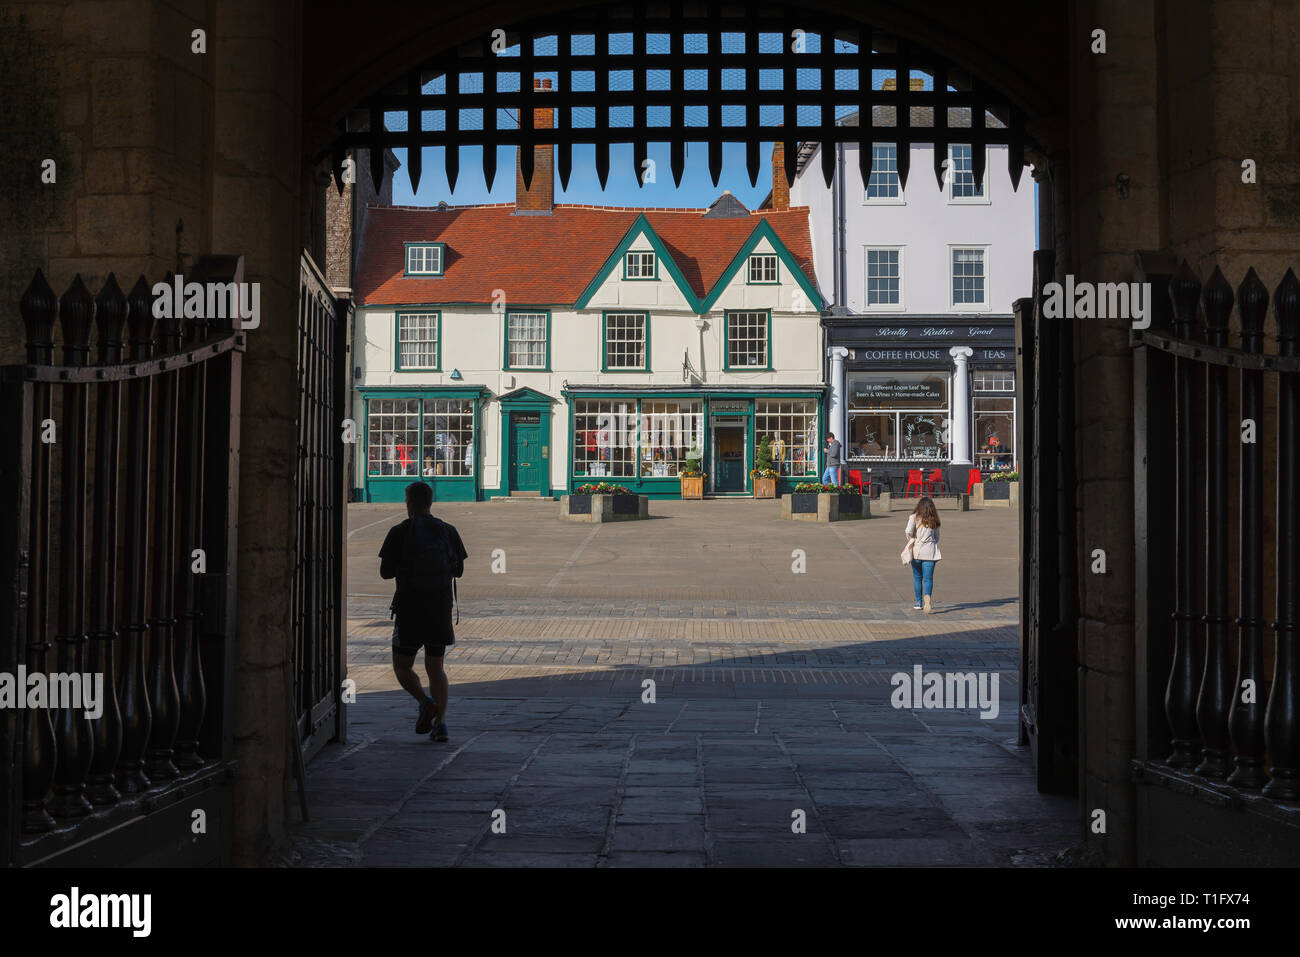 Bury St Edmunds town, view from the medieval Abbey Gate towards shops sited on Angel Hill in the centre of Bury St Edmunds, Suffolk, UK. Stock Photo